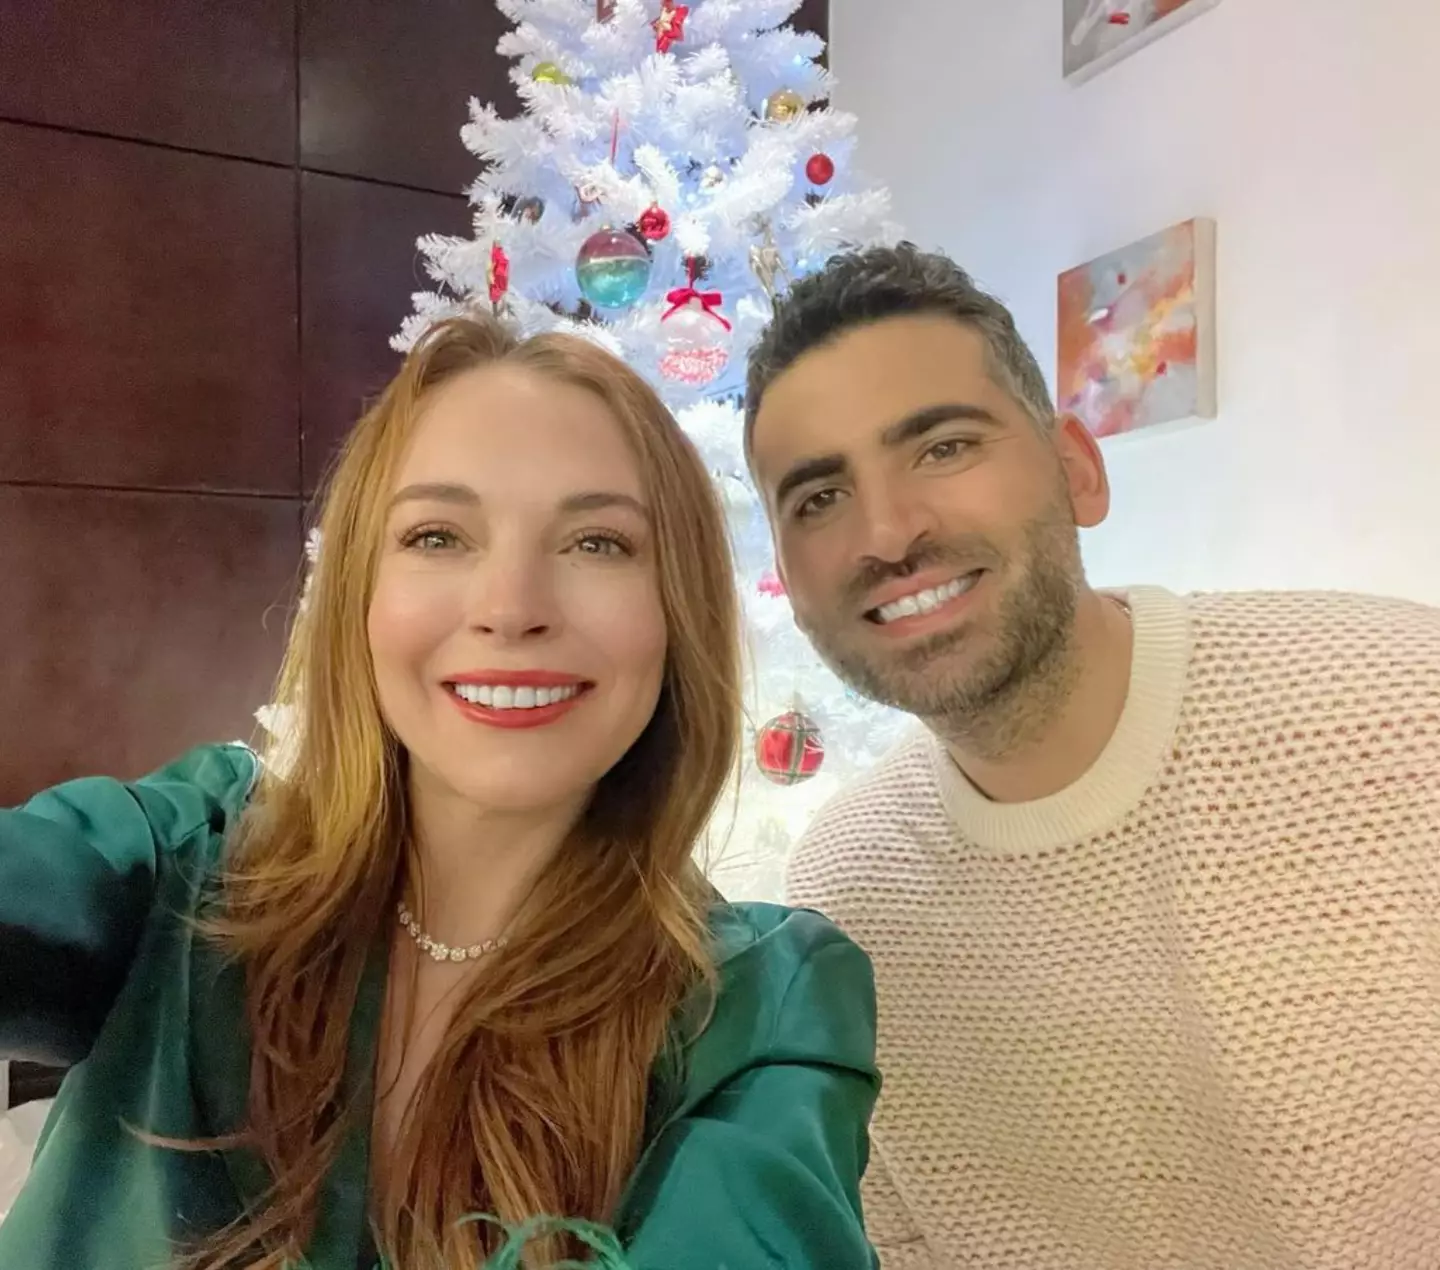 Lindsay and Bader are very private but shared this cute Christmas selfie last year.